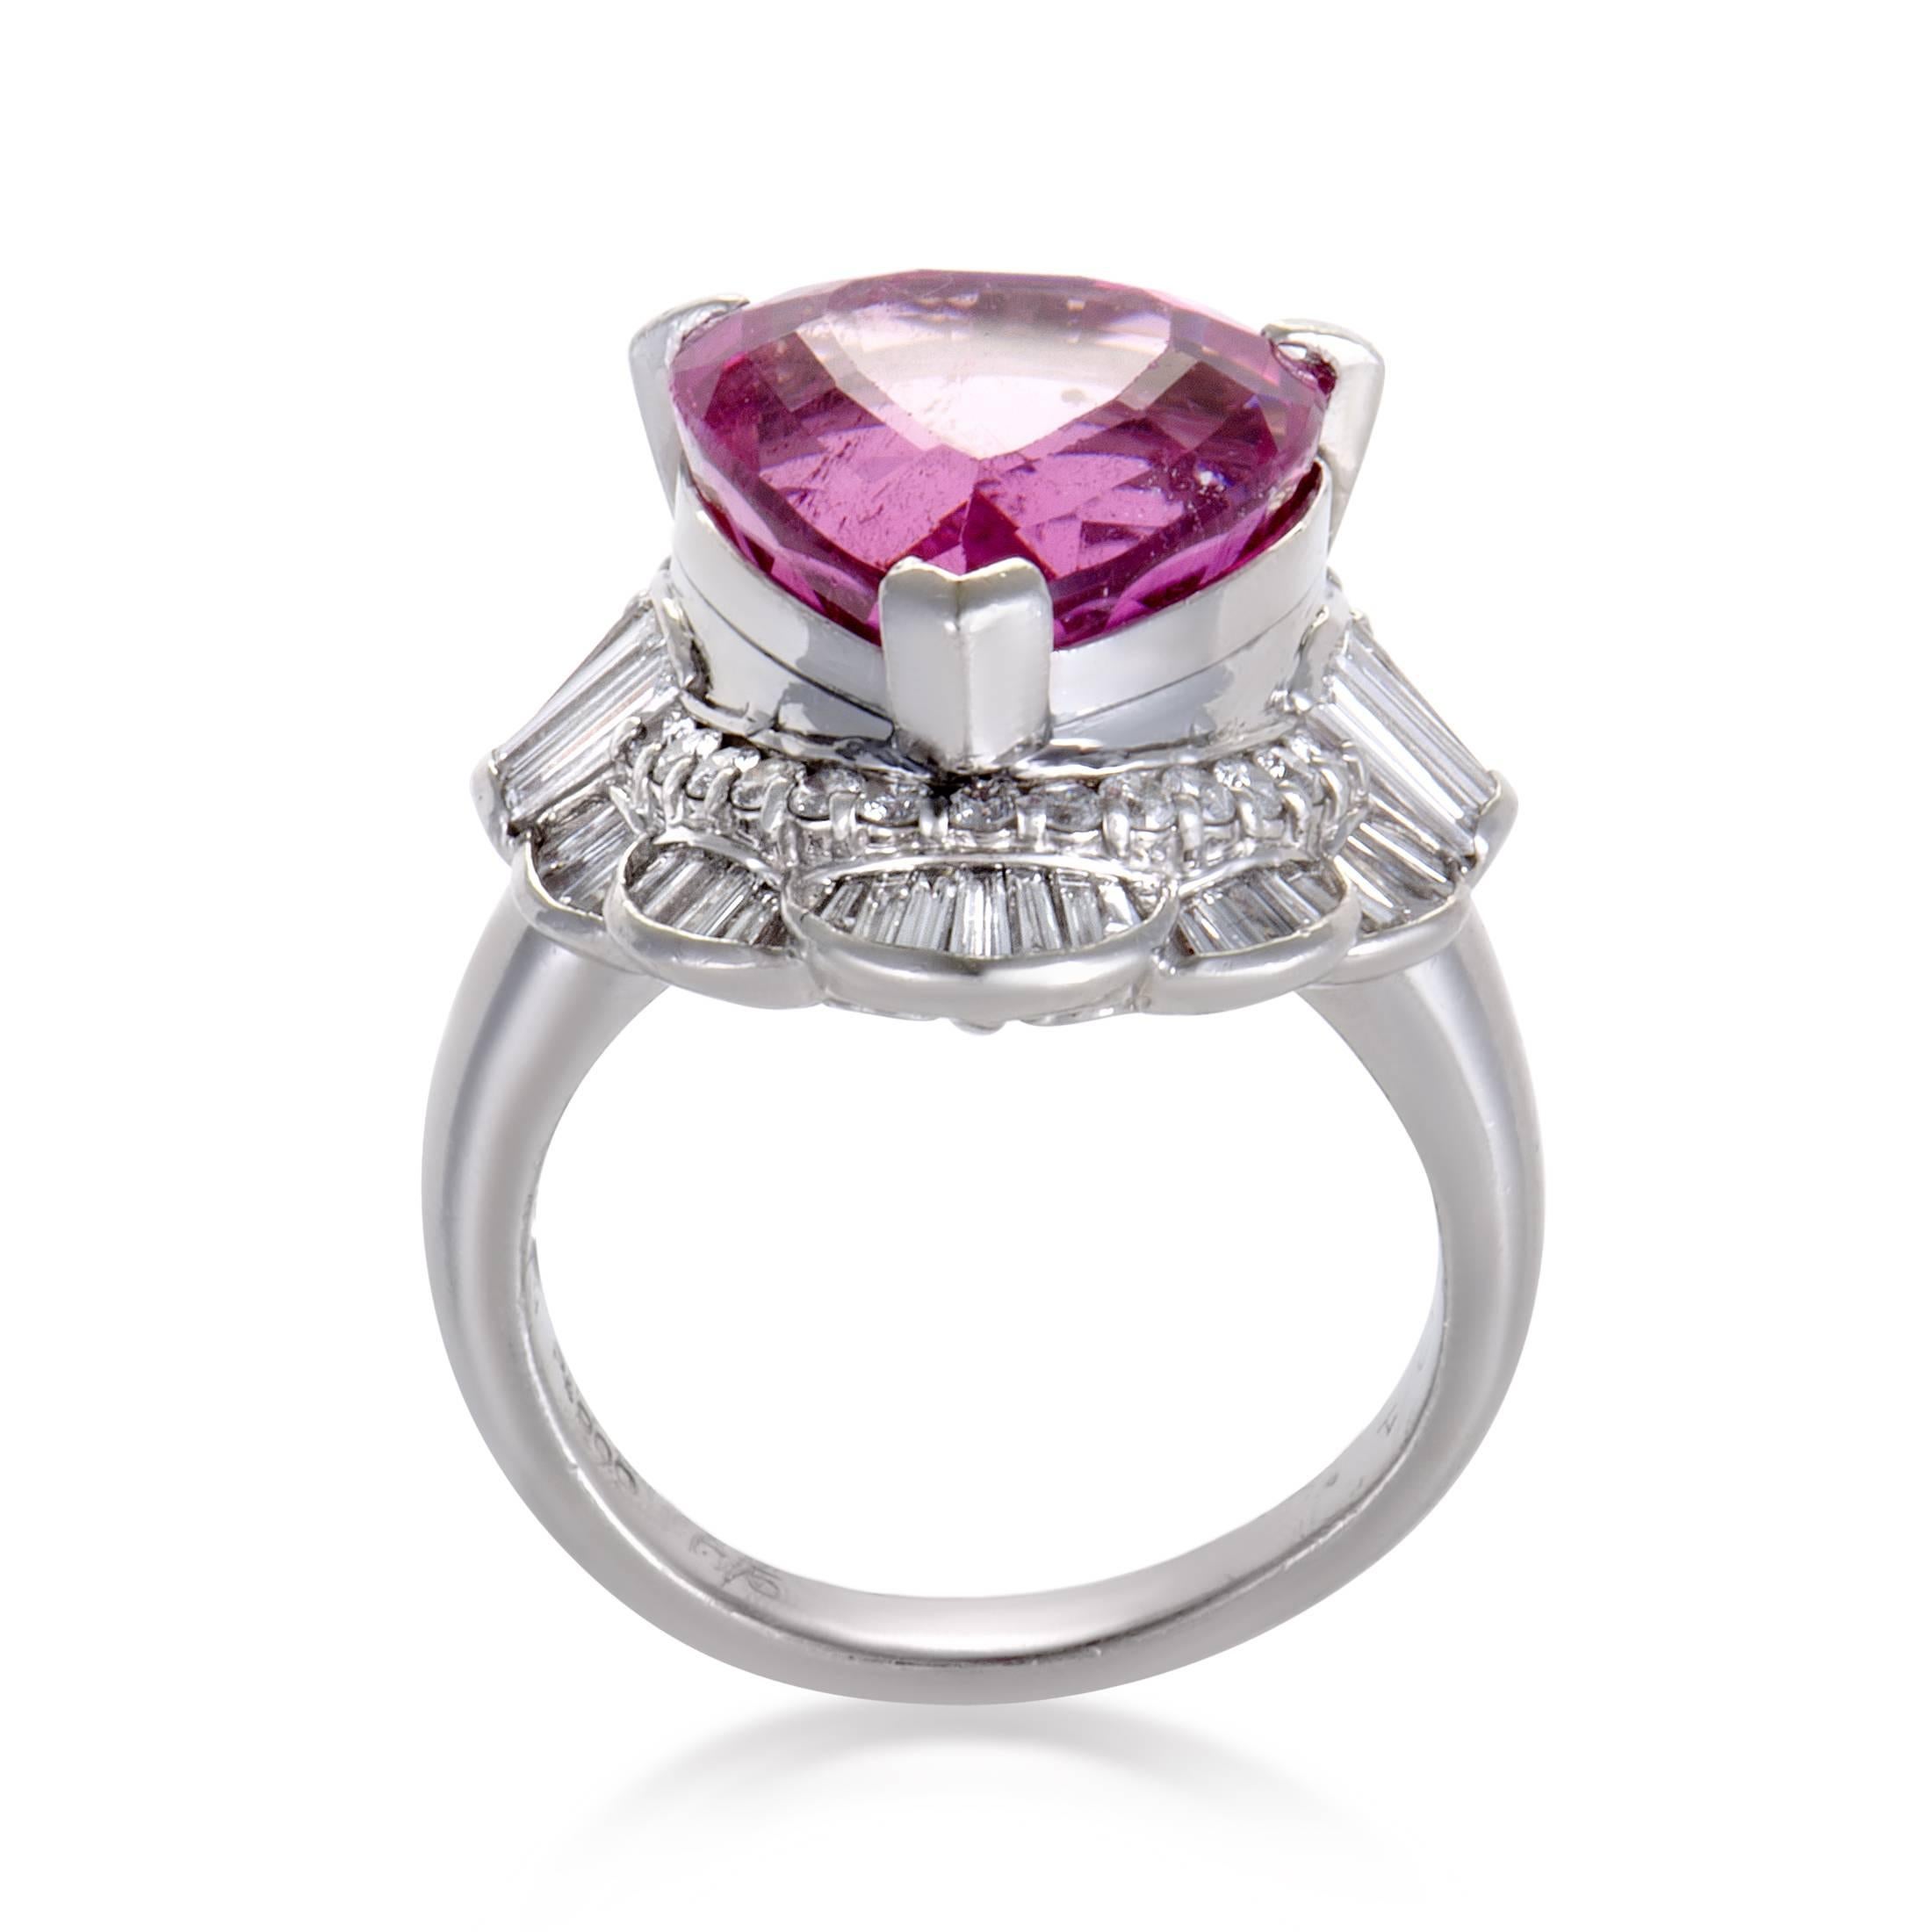 Diversely cut and fascinatingly arranged, the mesmerizing diamonds amounting to 1.21 carats produce a resplendent allure against shimmering platinum, providing an astonishing pedestal for the majestic pink tourmaline weighing 10.54 carats in this